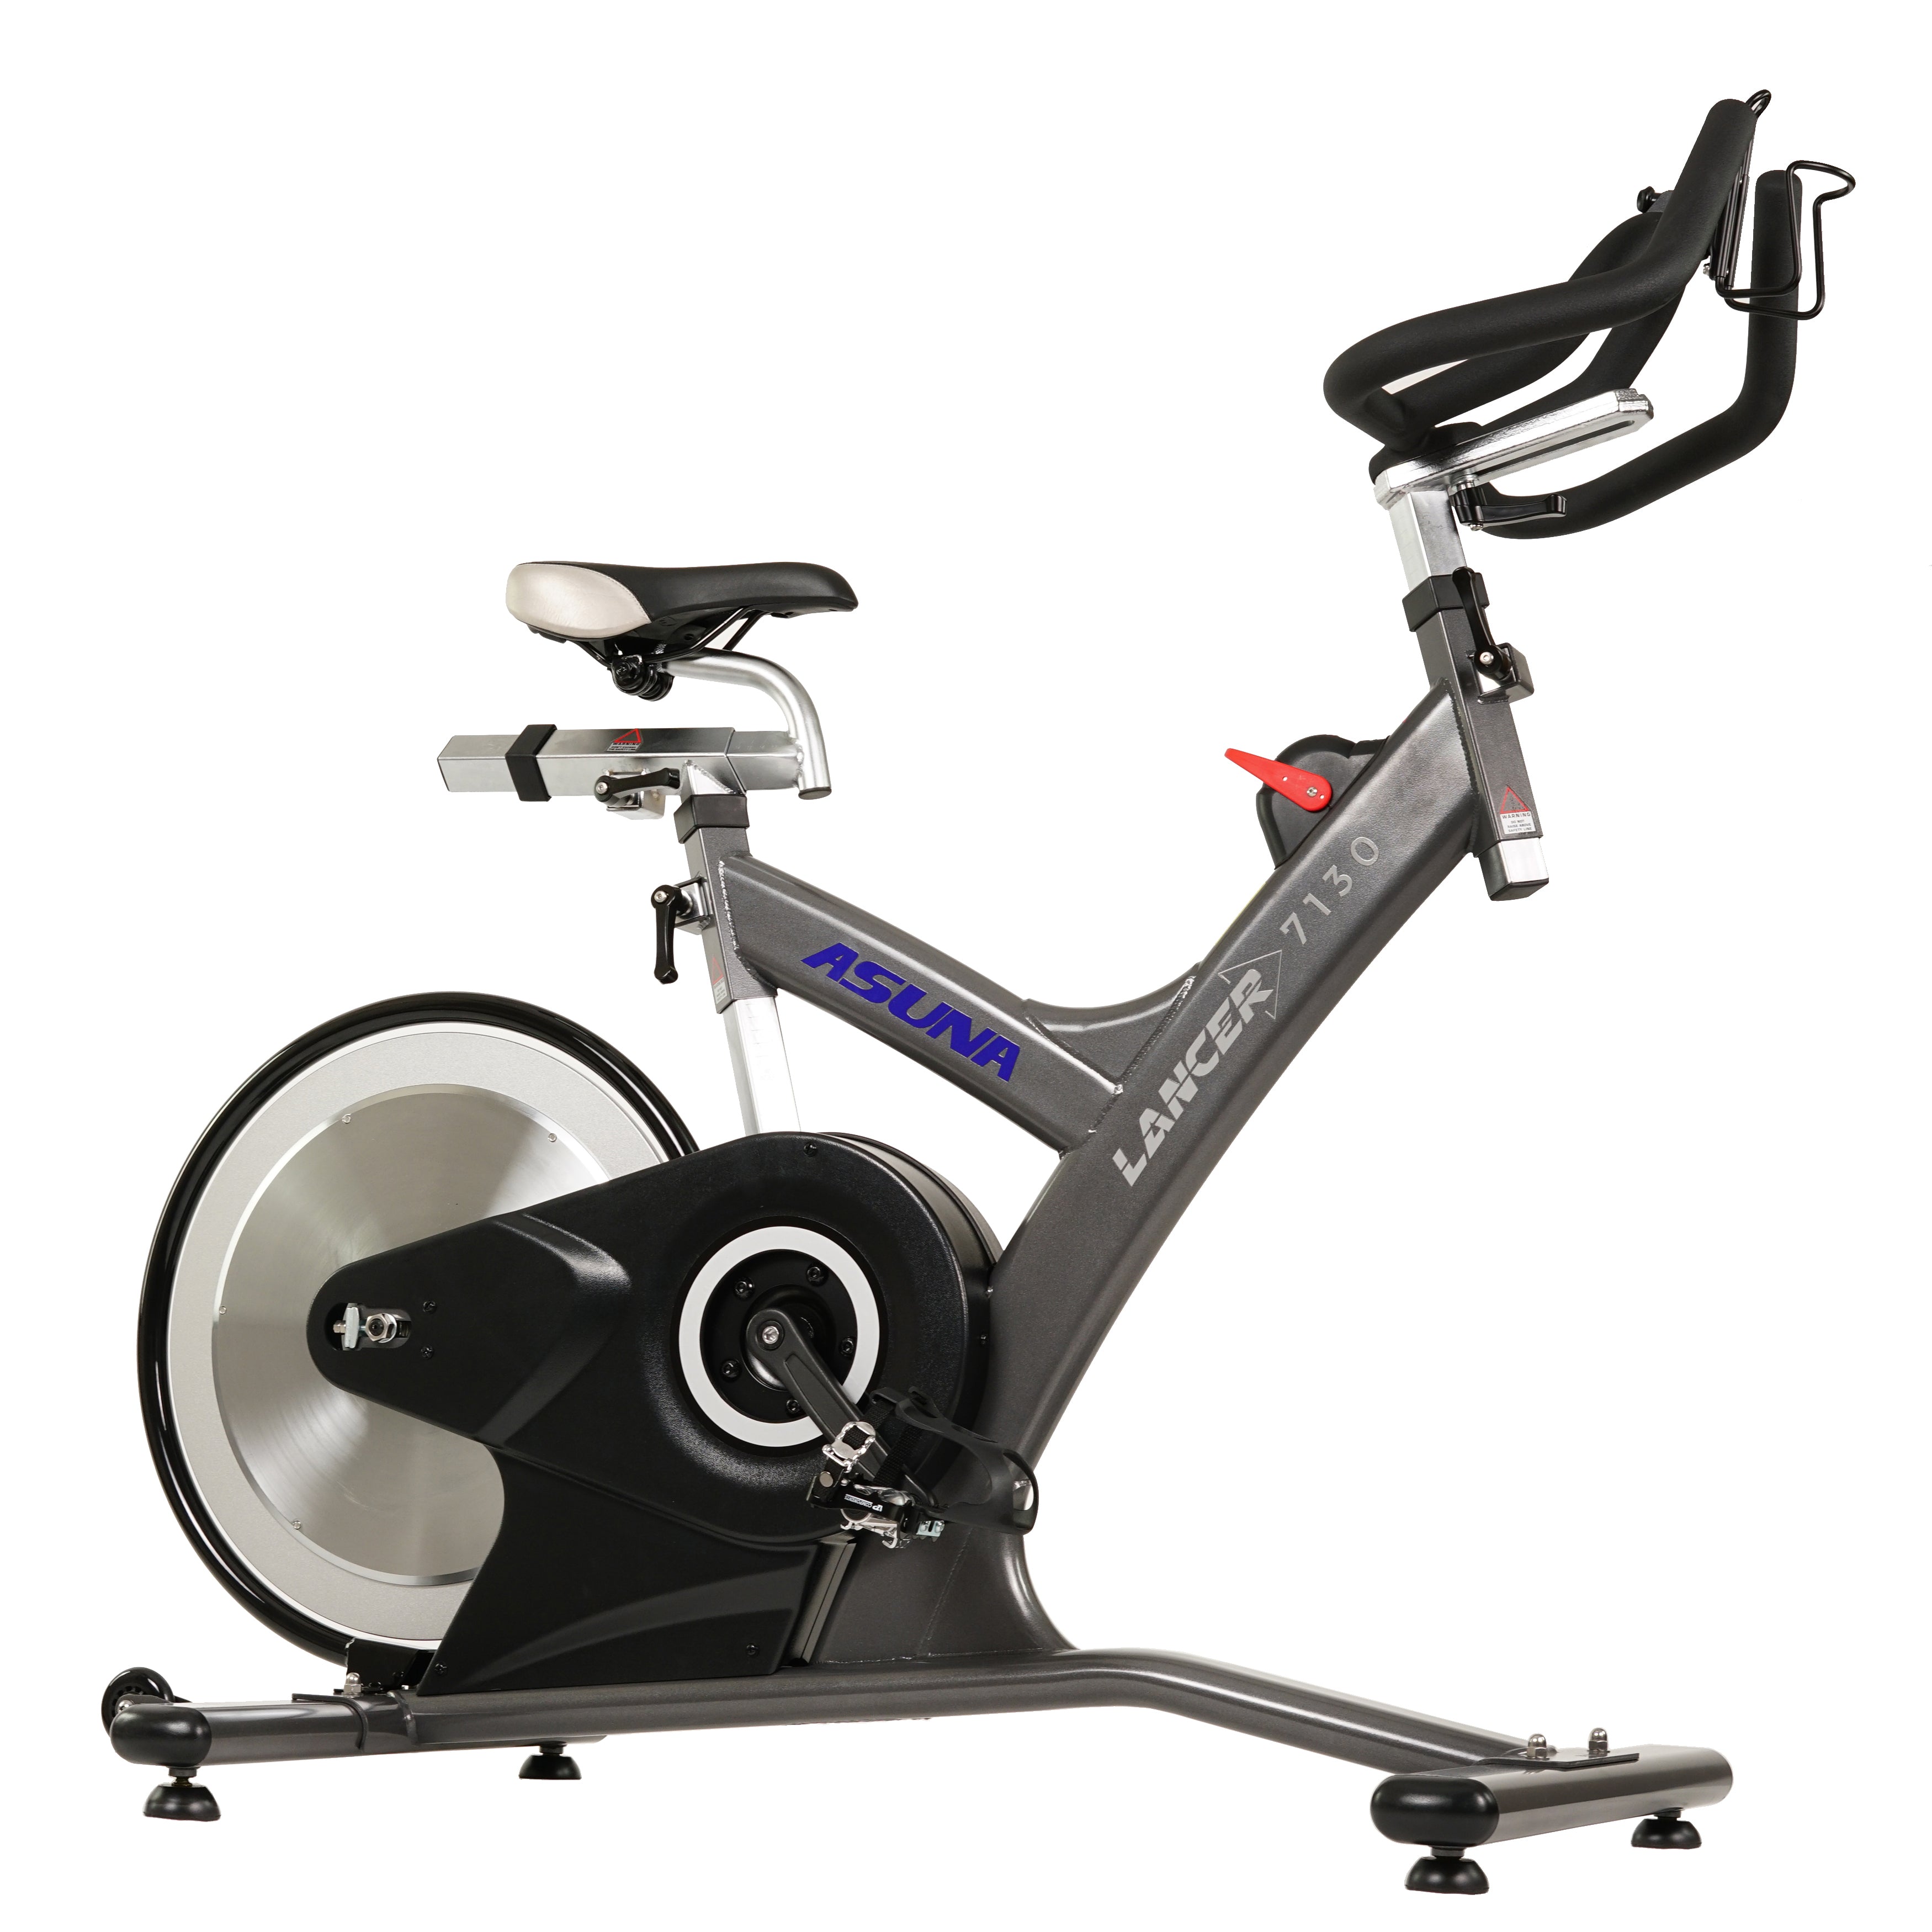 ASUNA 7130 Lancer Rear Drive Magnetic Commercial Indoor Cycling Bike